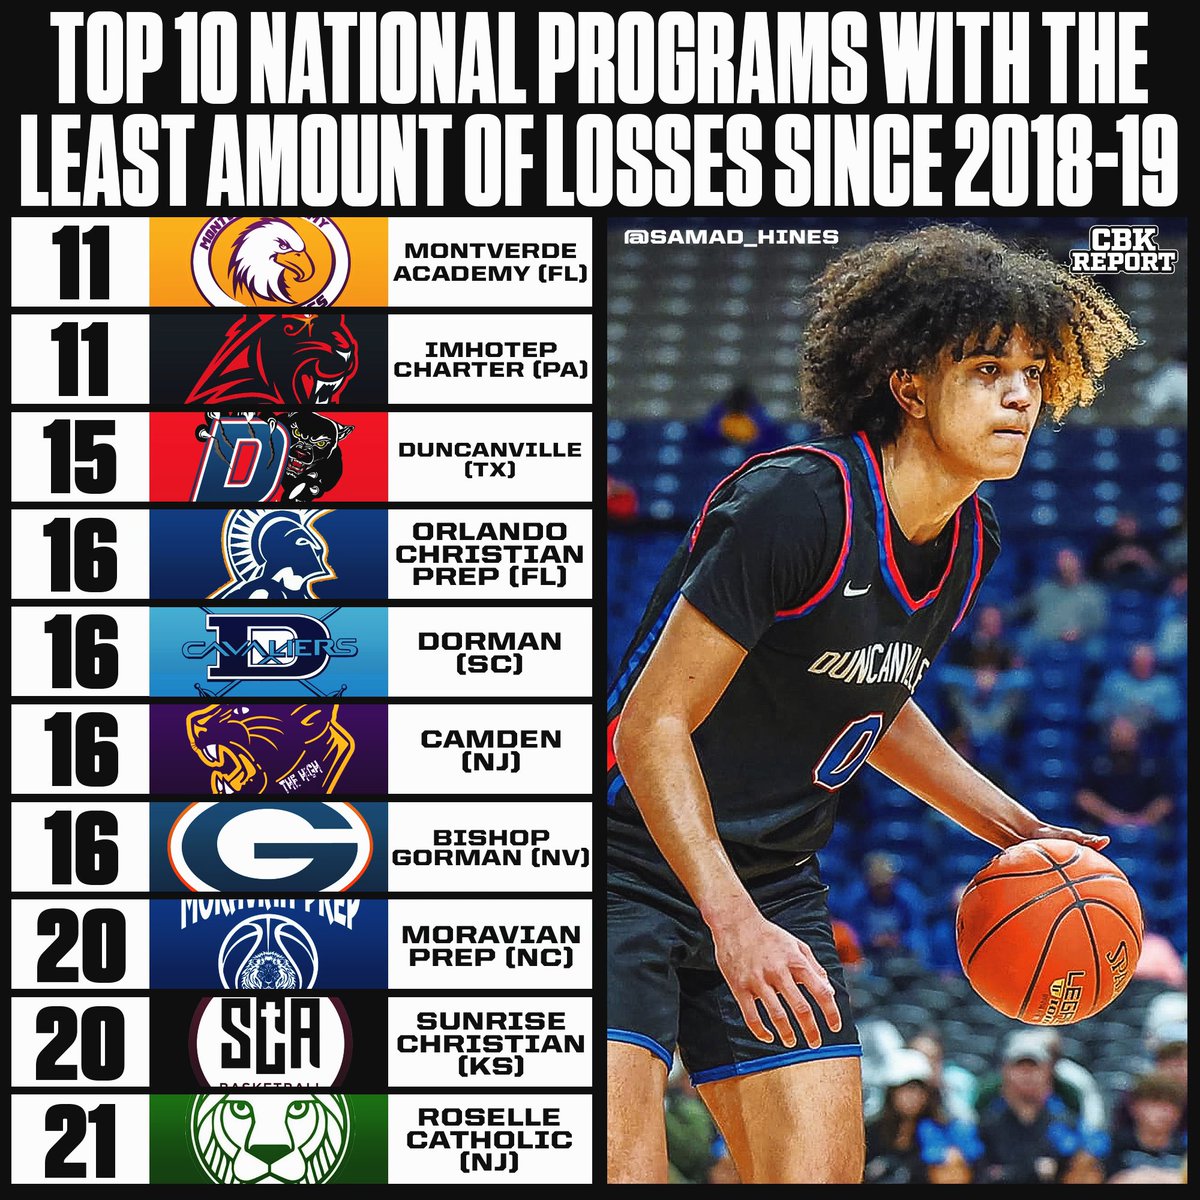 These national programs hold the LEAST amount of losses since the 2018-2019 high school season. These programs don’t lose much. Montverde Academy (FL) and Imhotep Charter (PA) are the only national programs that both have only lost 11 times since 2018-2019 headlining the list.